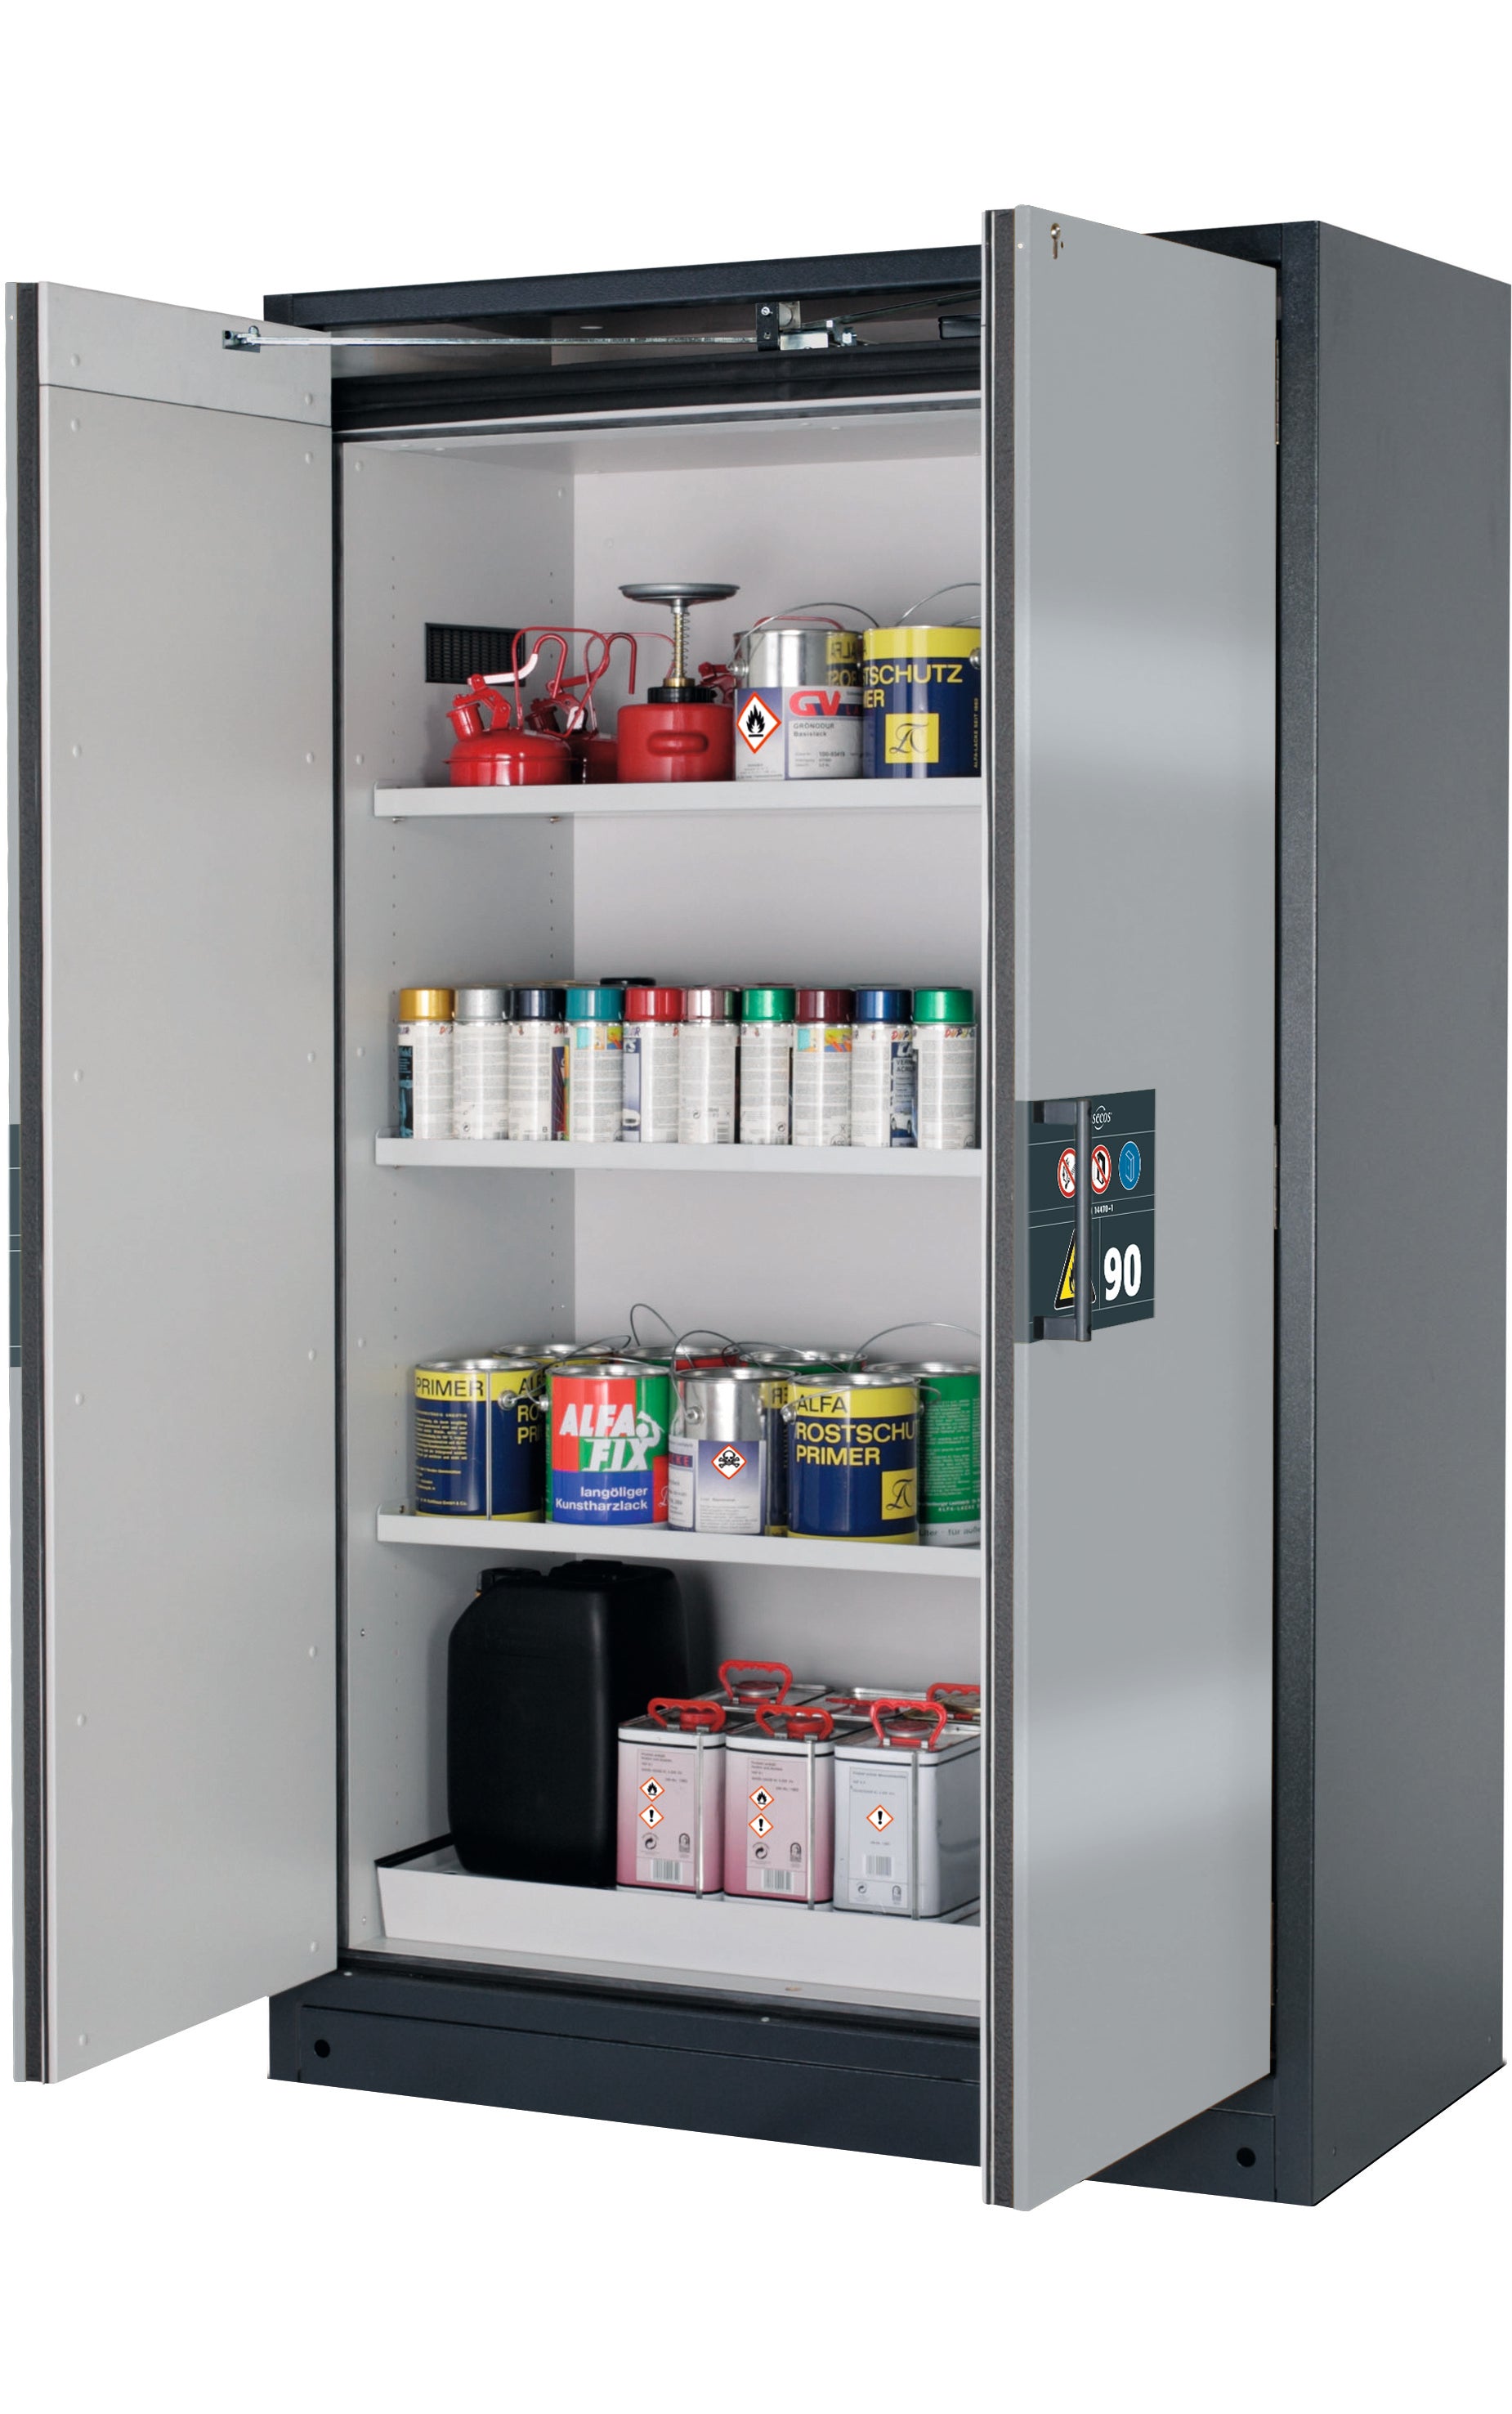 Type 90 safety storage cabinet Q-PEGASUS-90 model Q90.195.120.WDAC in asecos silver with 3x shelf standard (sheet steel),